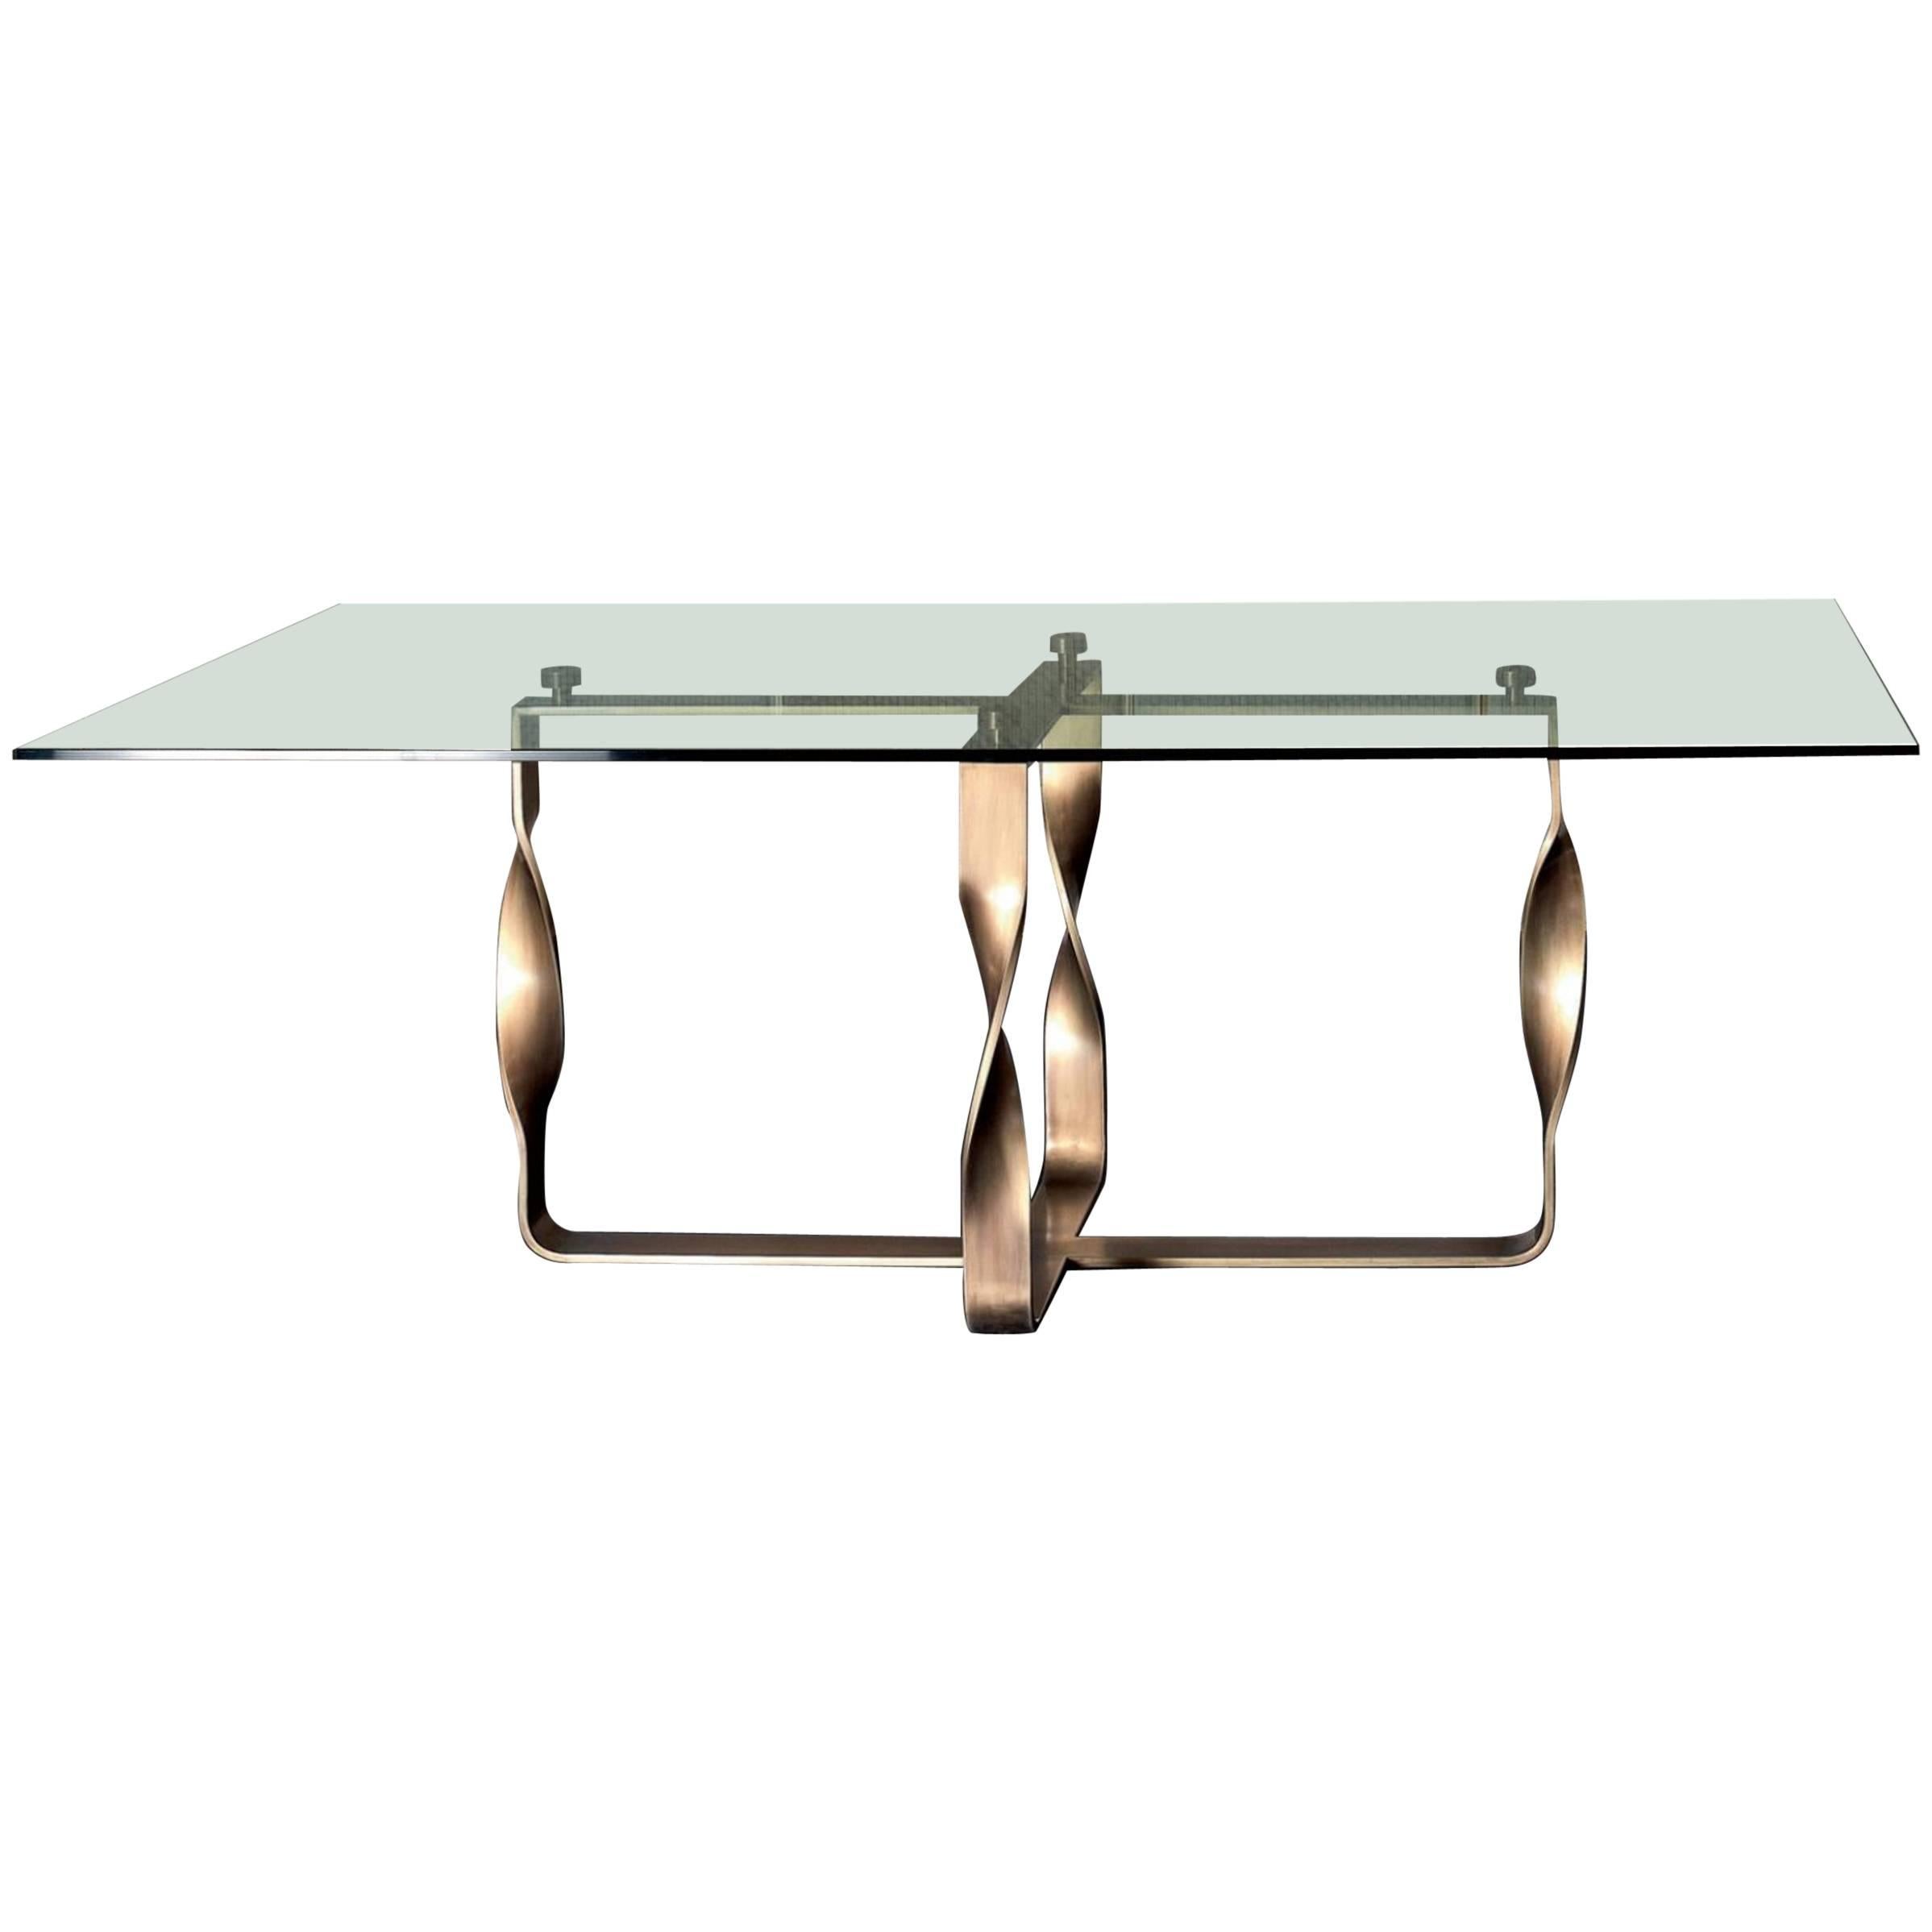 Torsade Table Bronze Base Legs and Glass Top For Sale